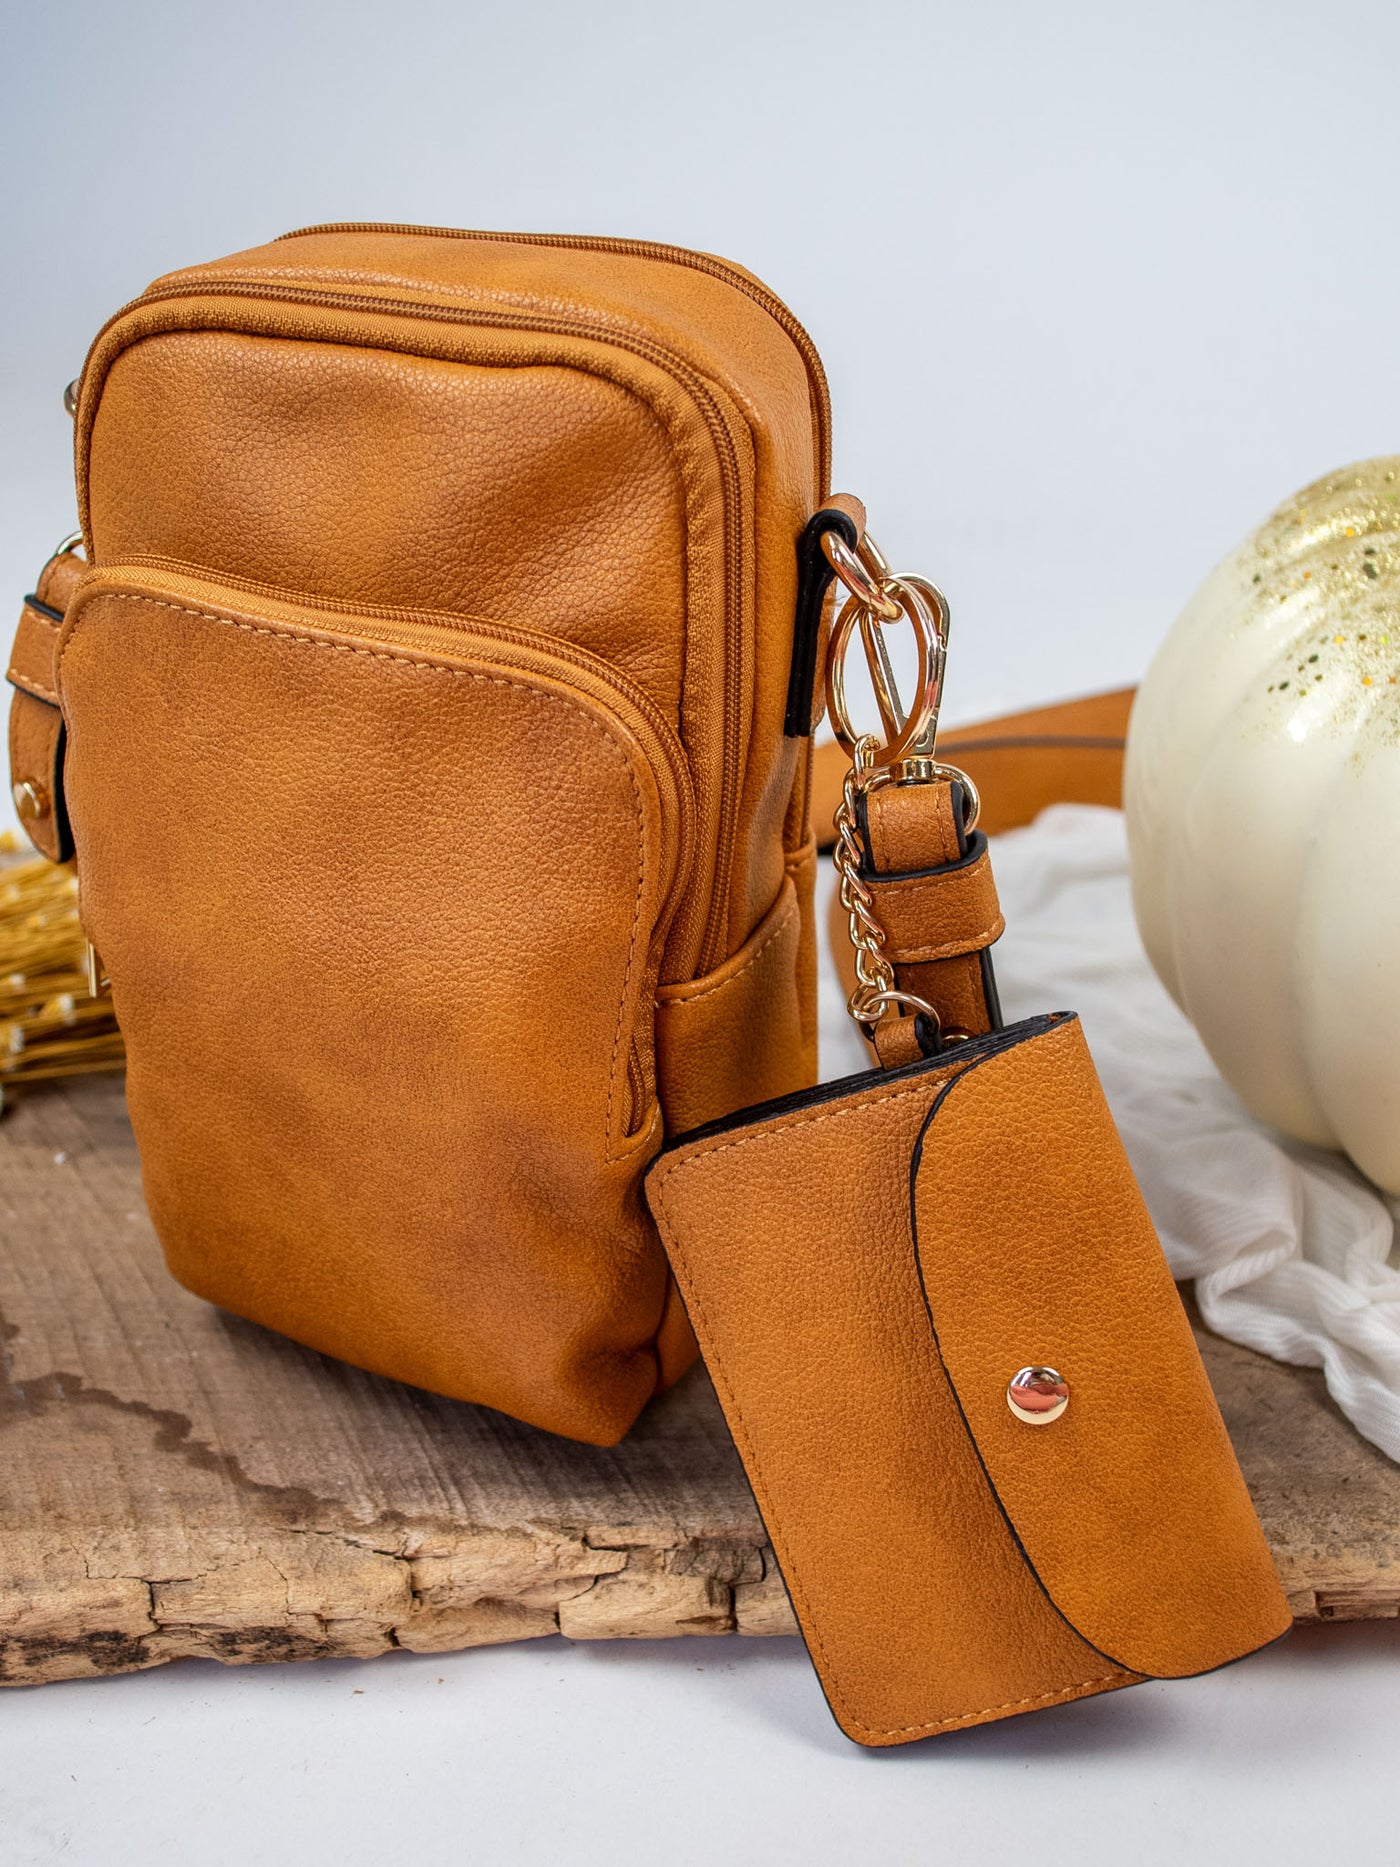 A pumpkin brown vegan leather crossbody bag with a detachable snap pouch.